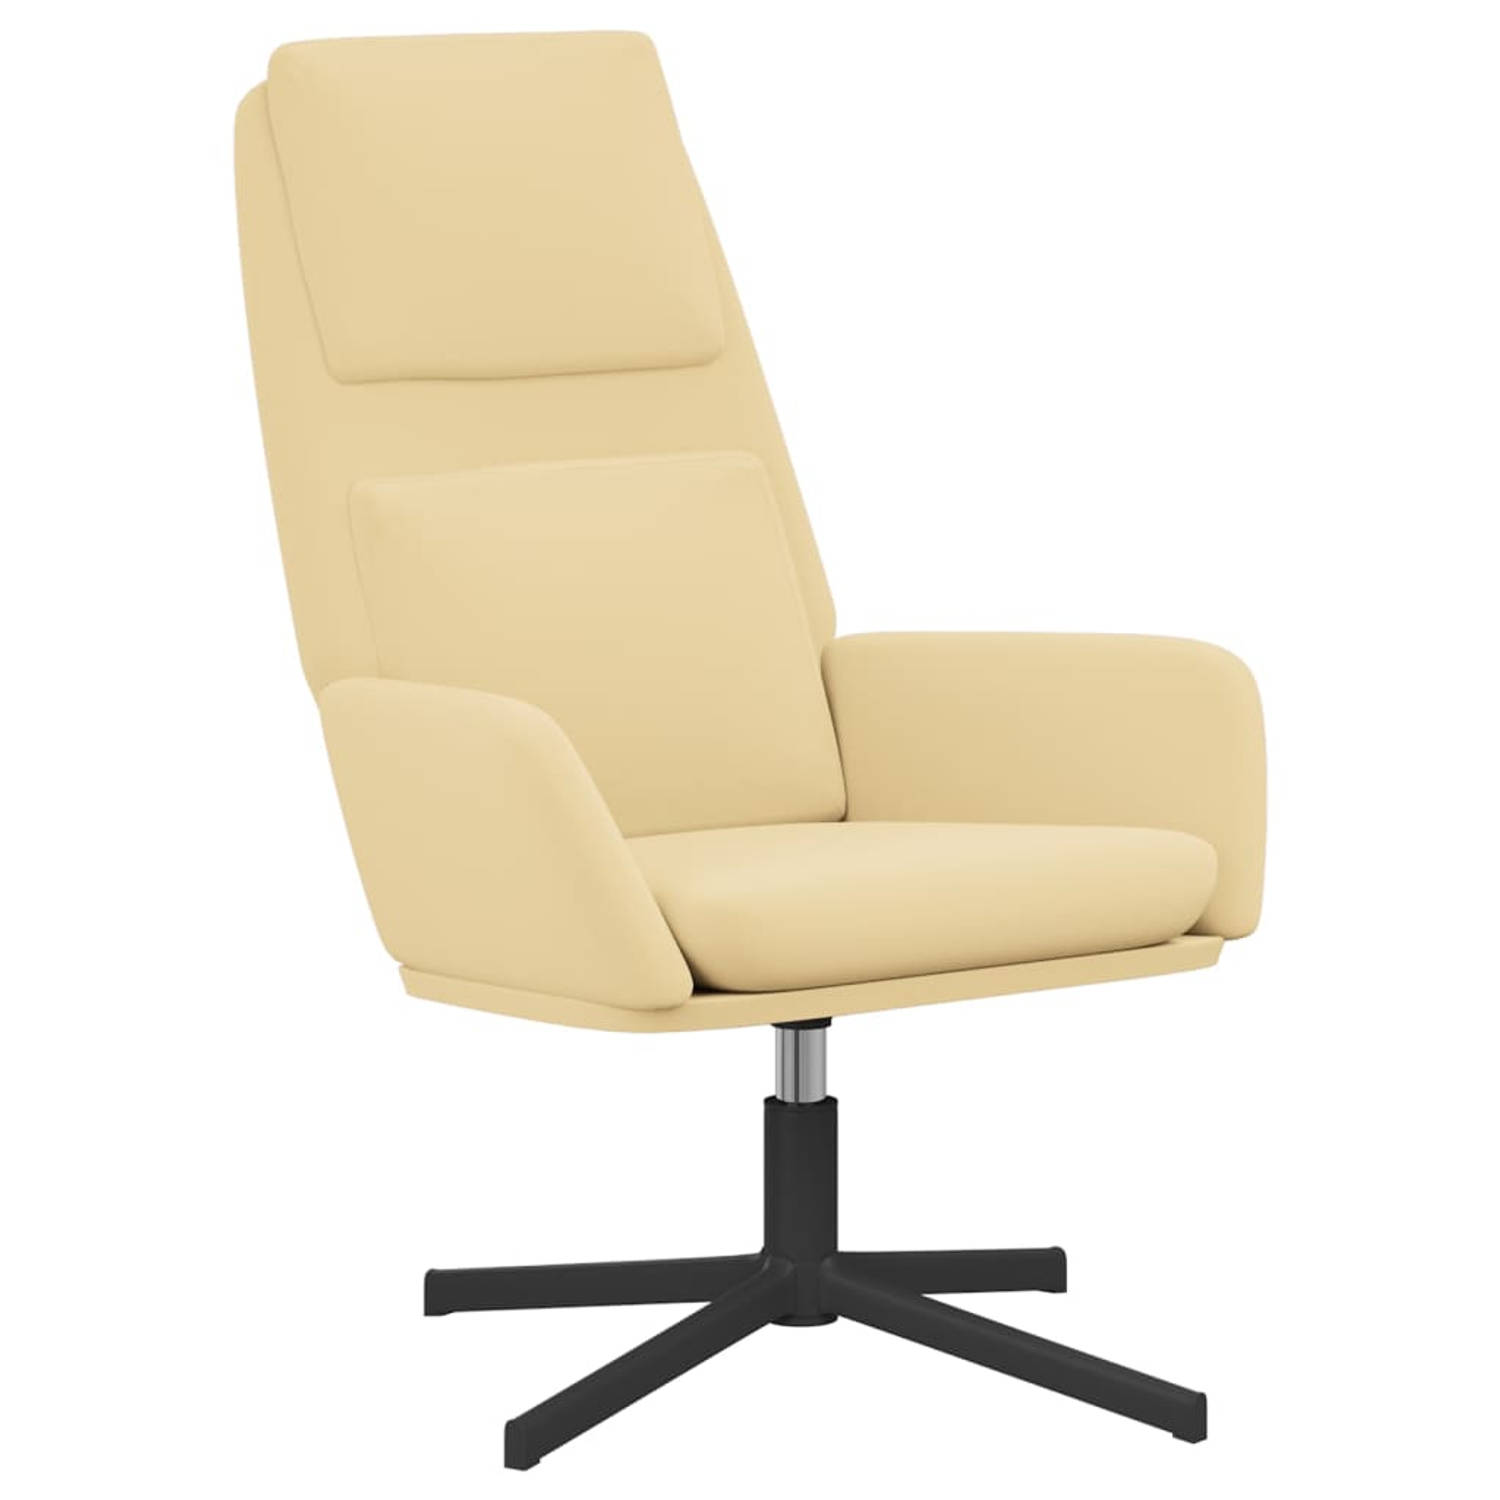 The Living Store Relaxstoel fluweel crèmewit - Fauteuil